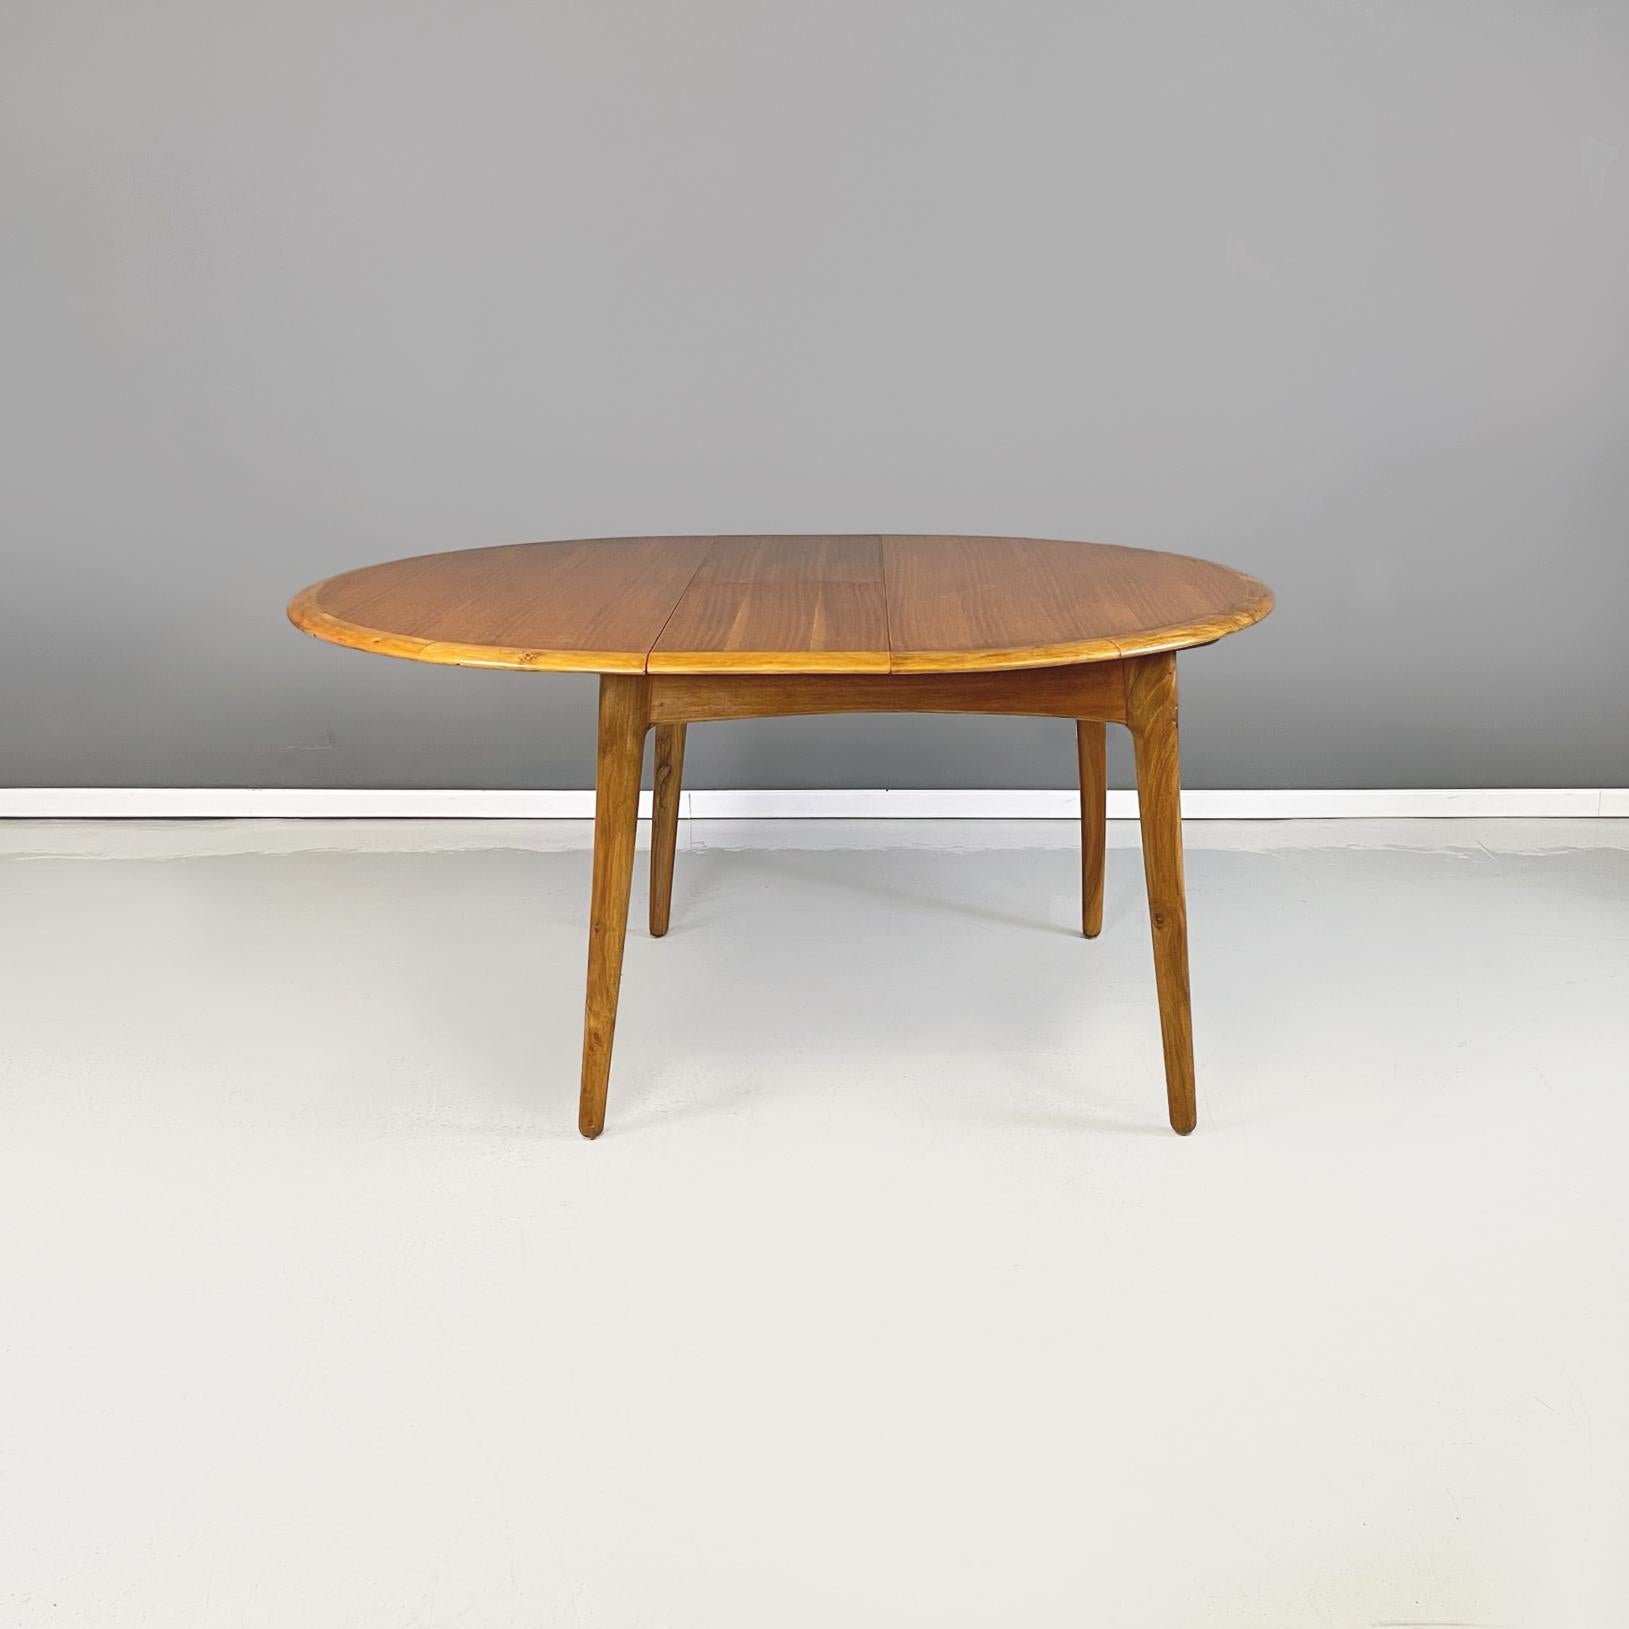 Mid-20th Century North Europa Midcentury Oval Round Wooden Dining Table with Extensions, 1960s For Sale